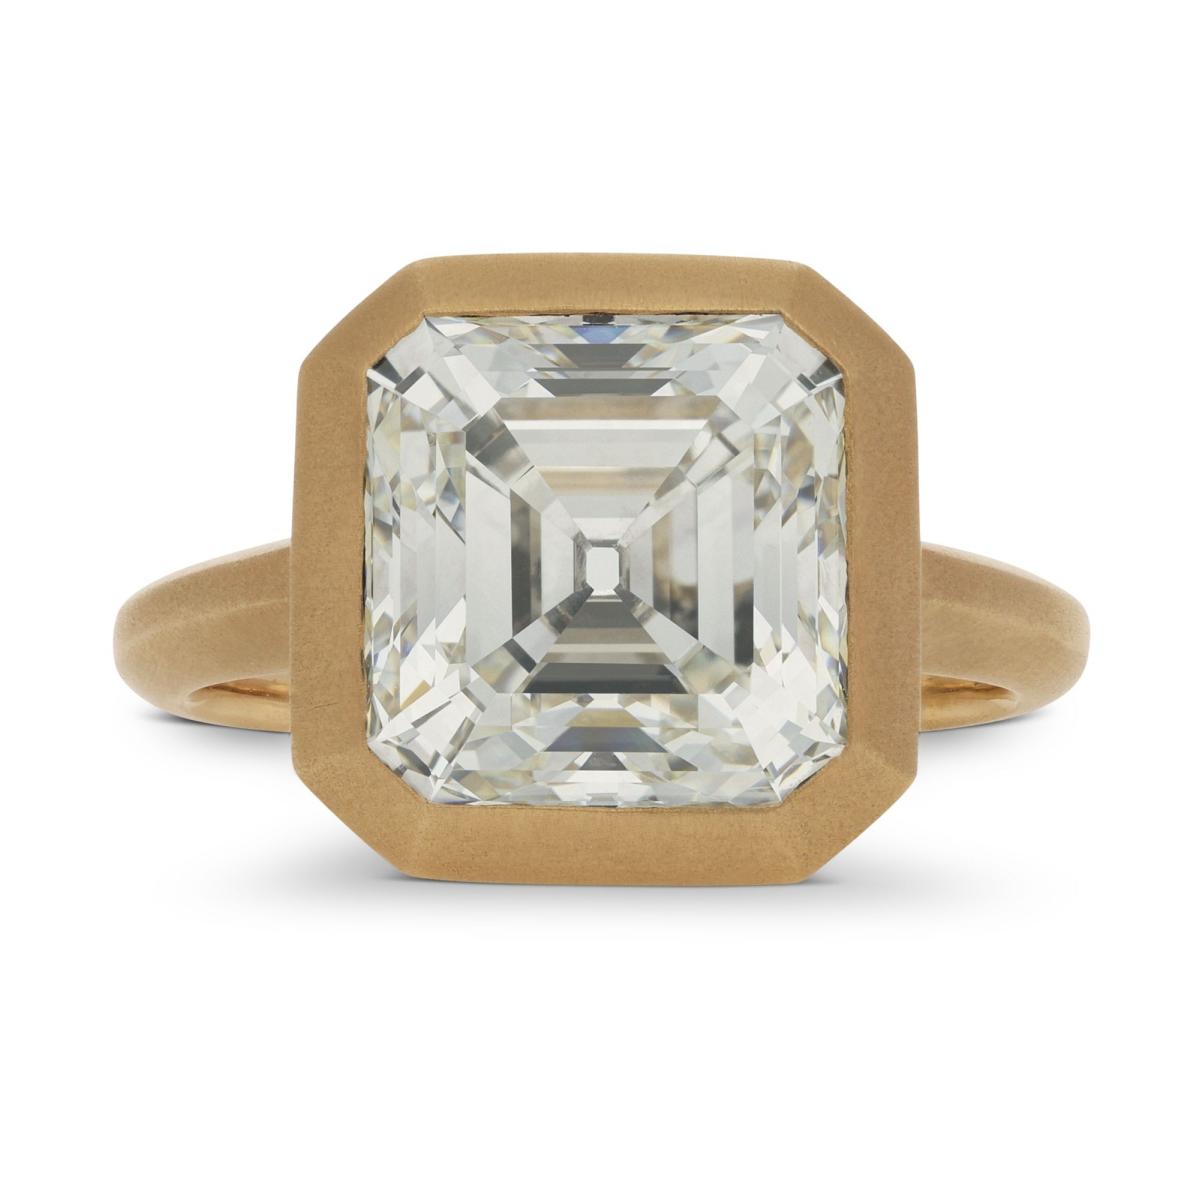 Hancocks 5.06ct Antique Asscher Cut Diamond In A Brushed Rose Gold Solitaire Ring